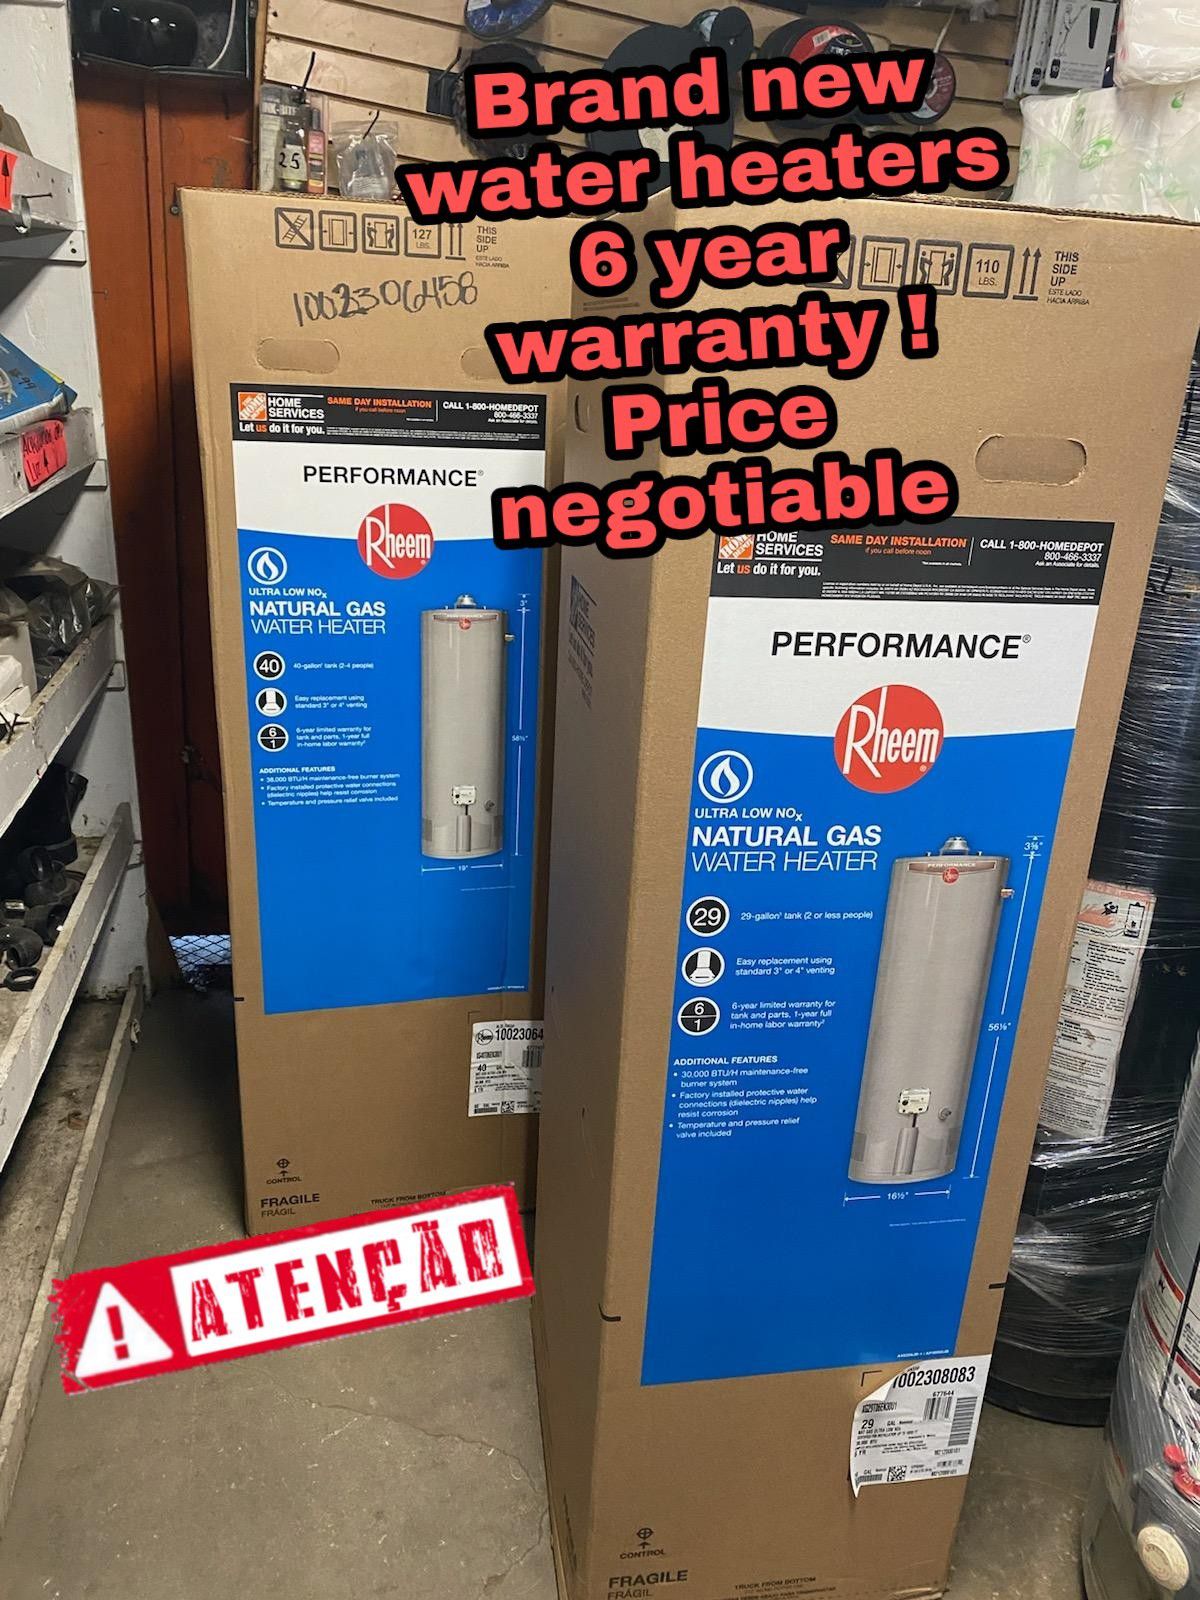 Brand New water heater with 6 year warranty